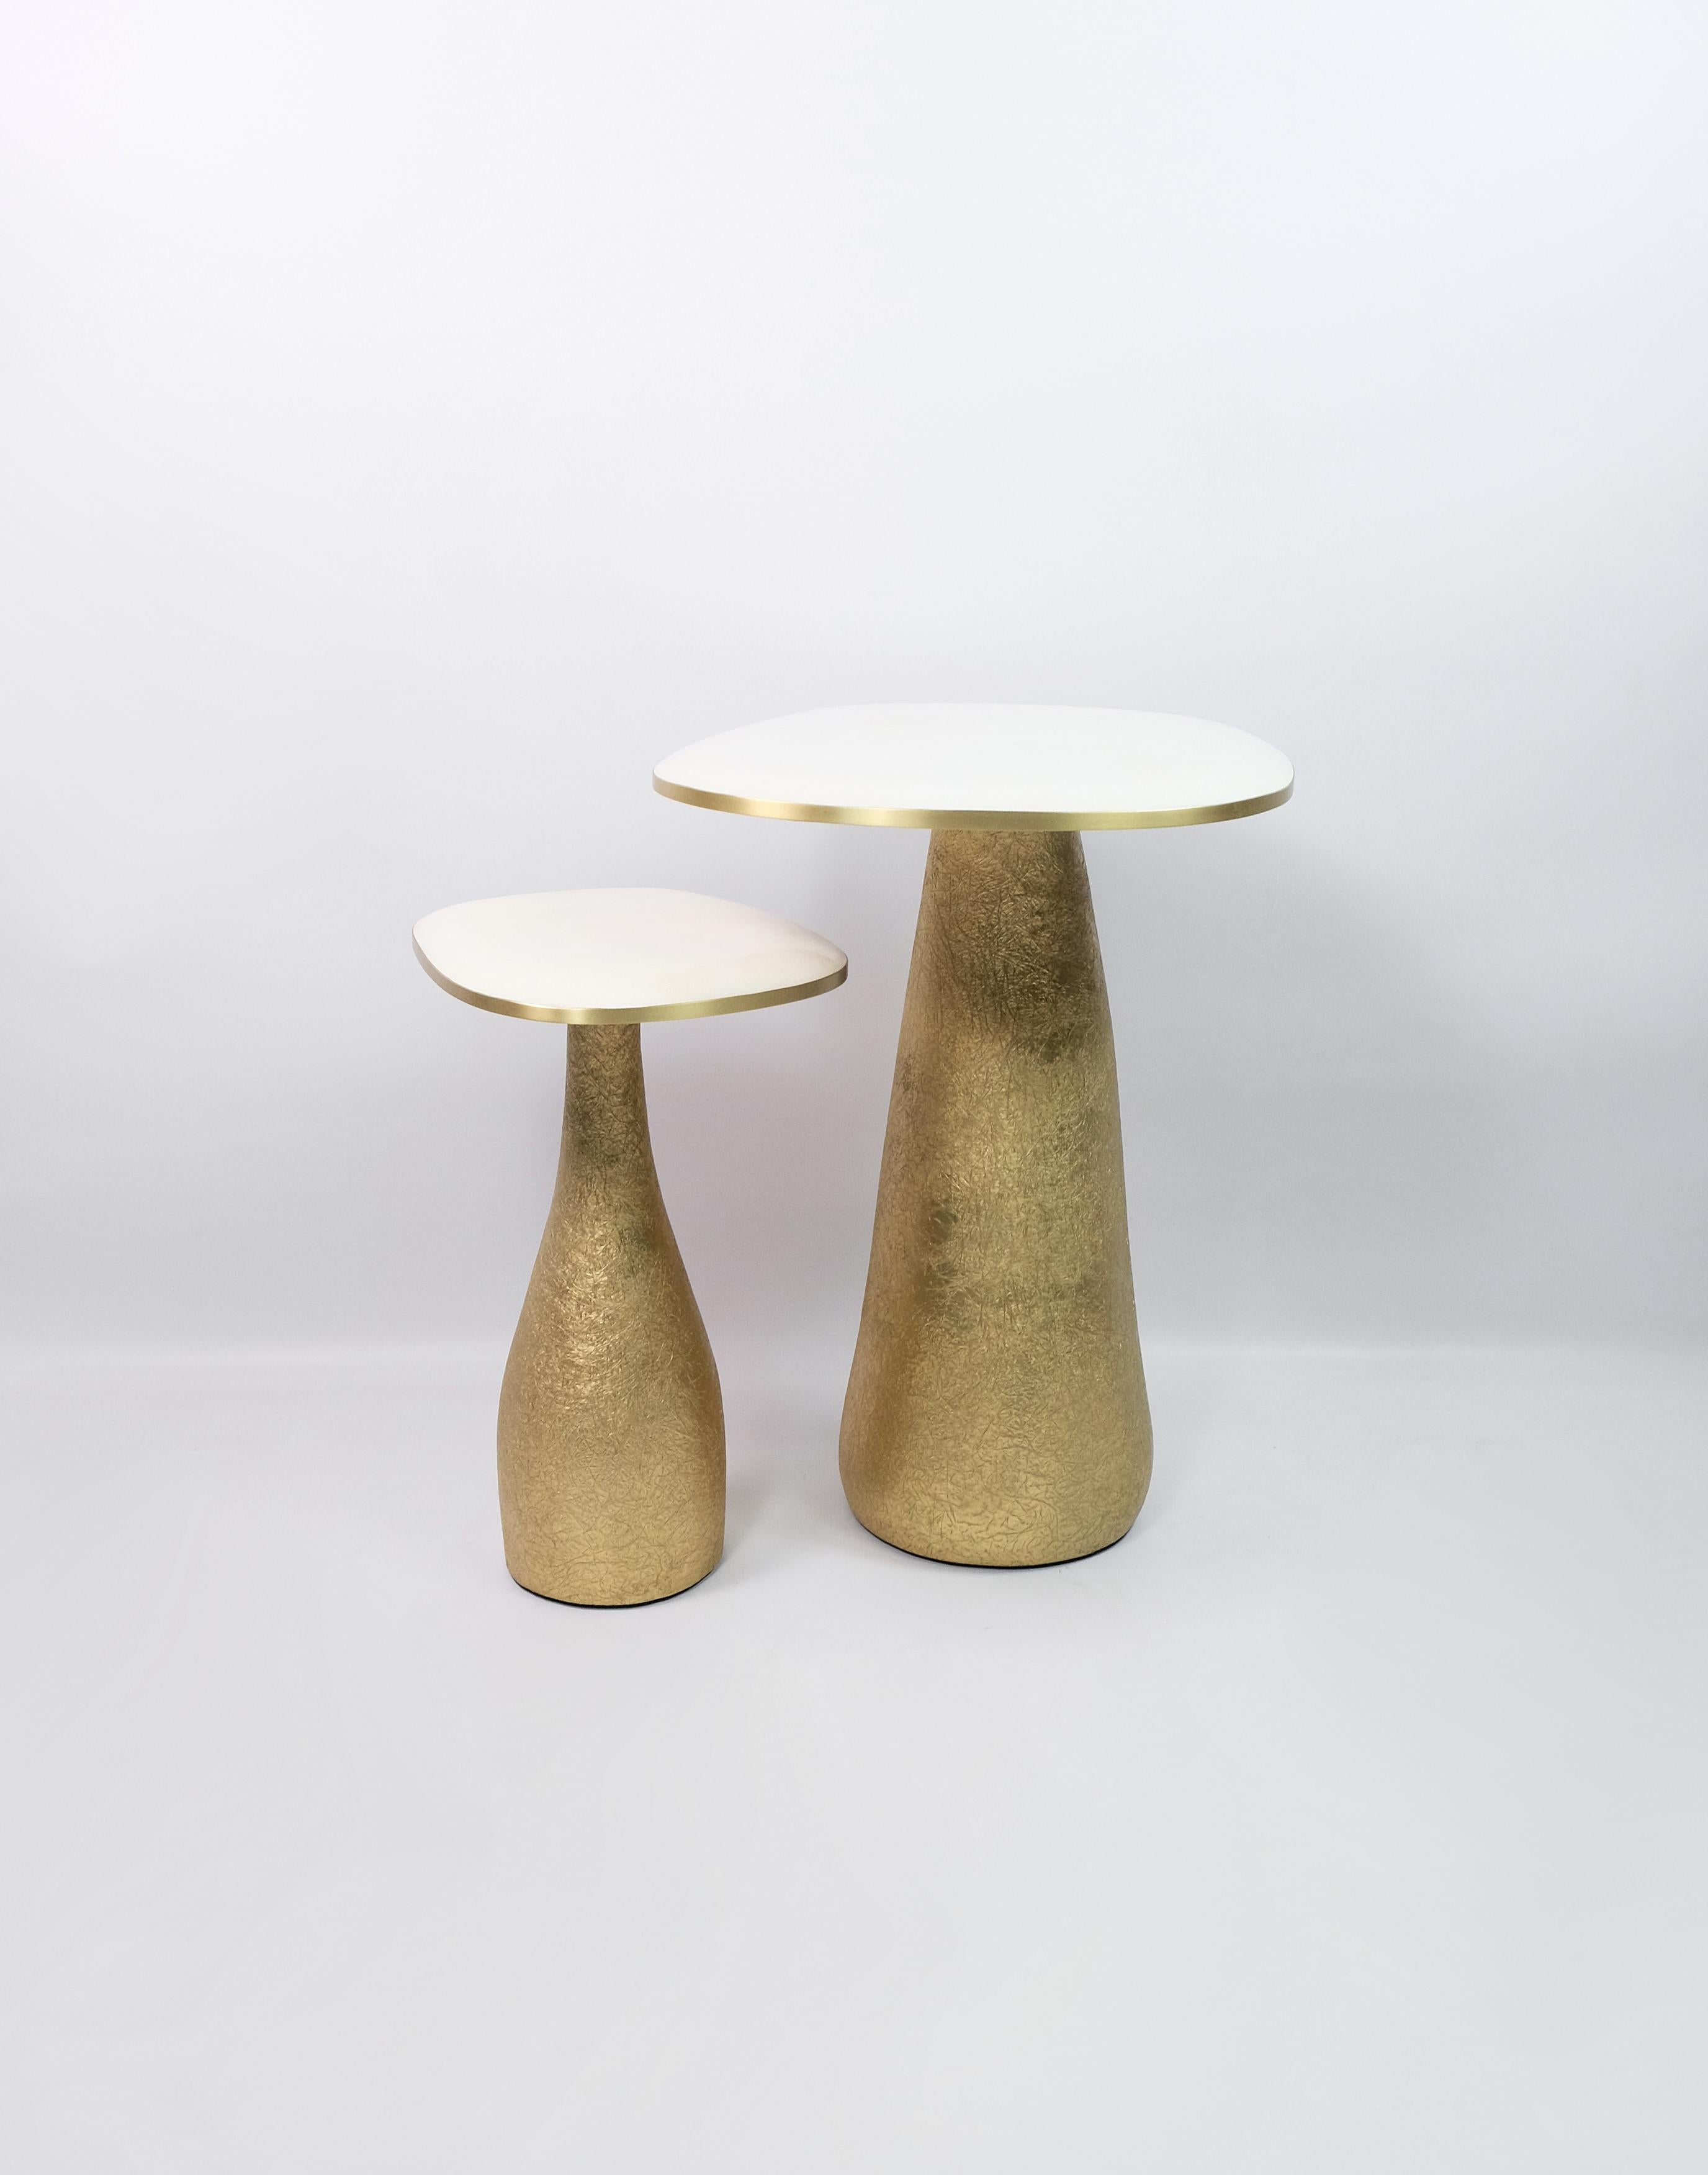 This set of 2 tables is made of a white rock crystal marquetry top with brass trims.
The base is made of wood with a gilded semi-raw glass fiber inlaying.
The semi raw finishing brings an interesting texture thanks to the nice organic shape of the